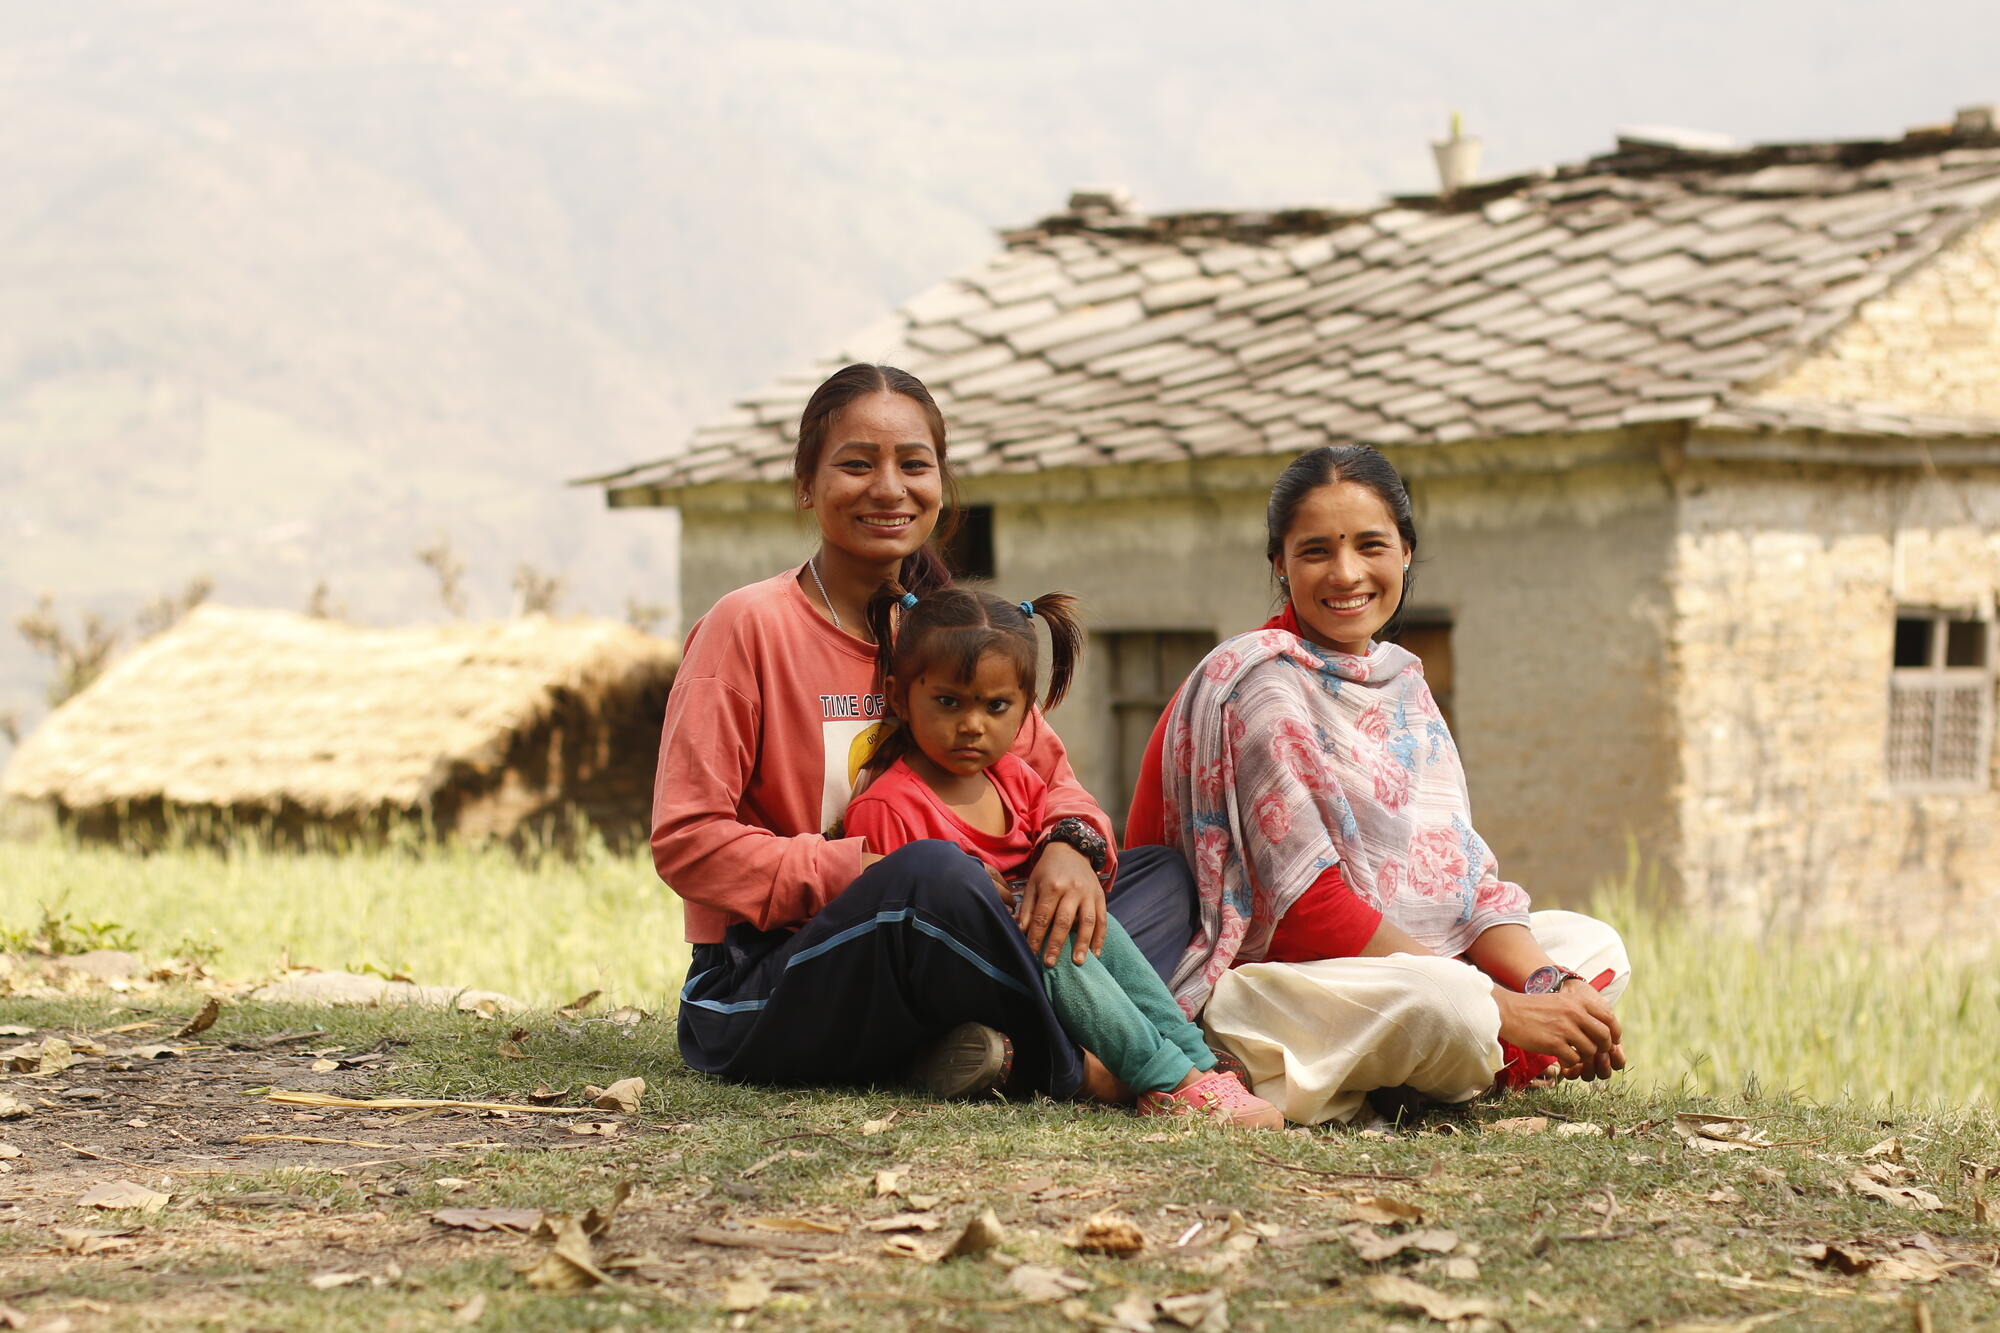 It Takes Nepal to End Child Marriage campaign